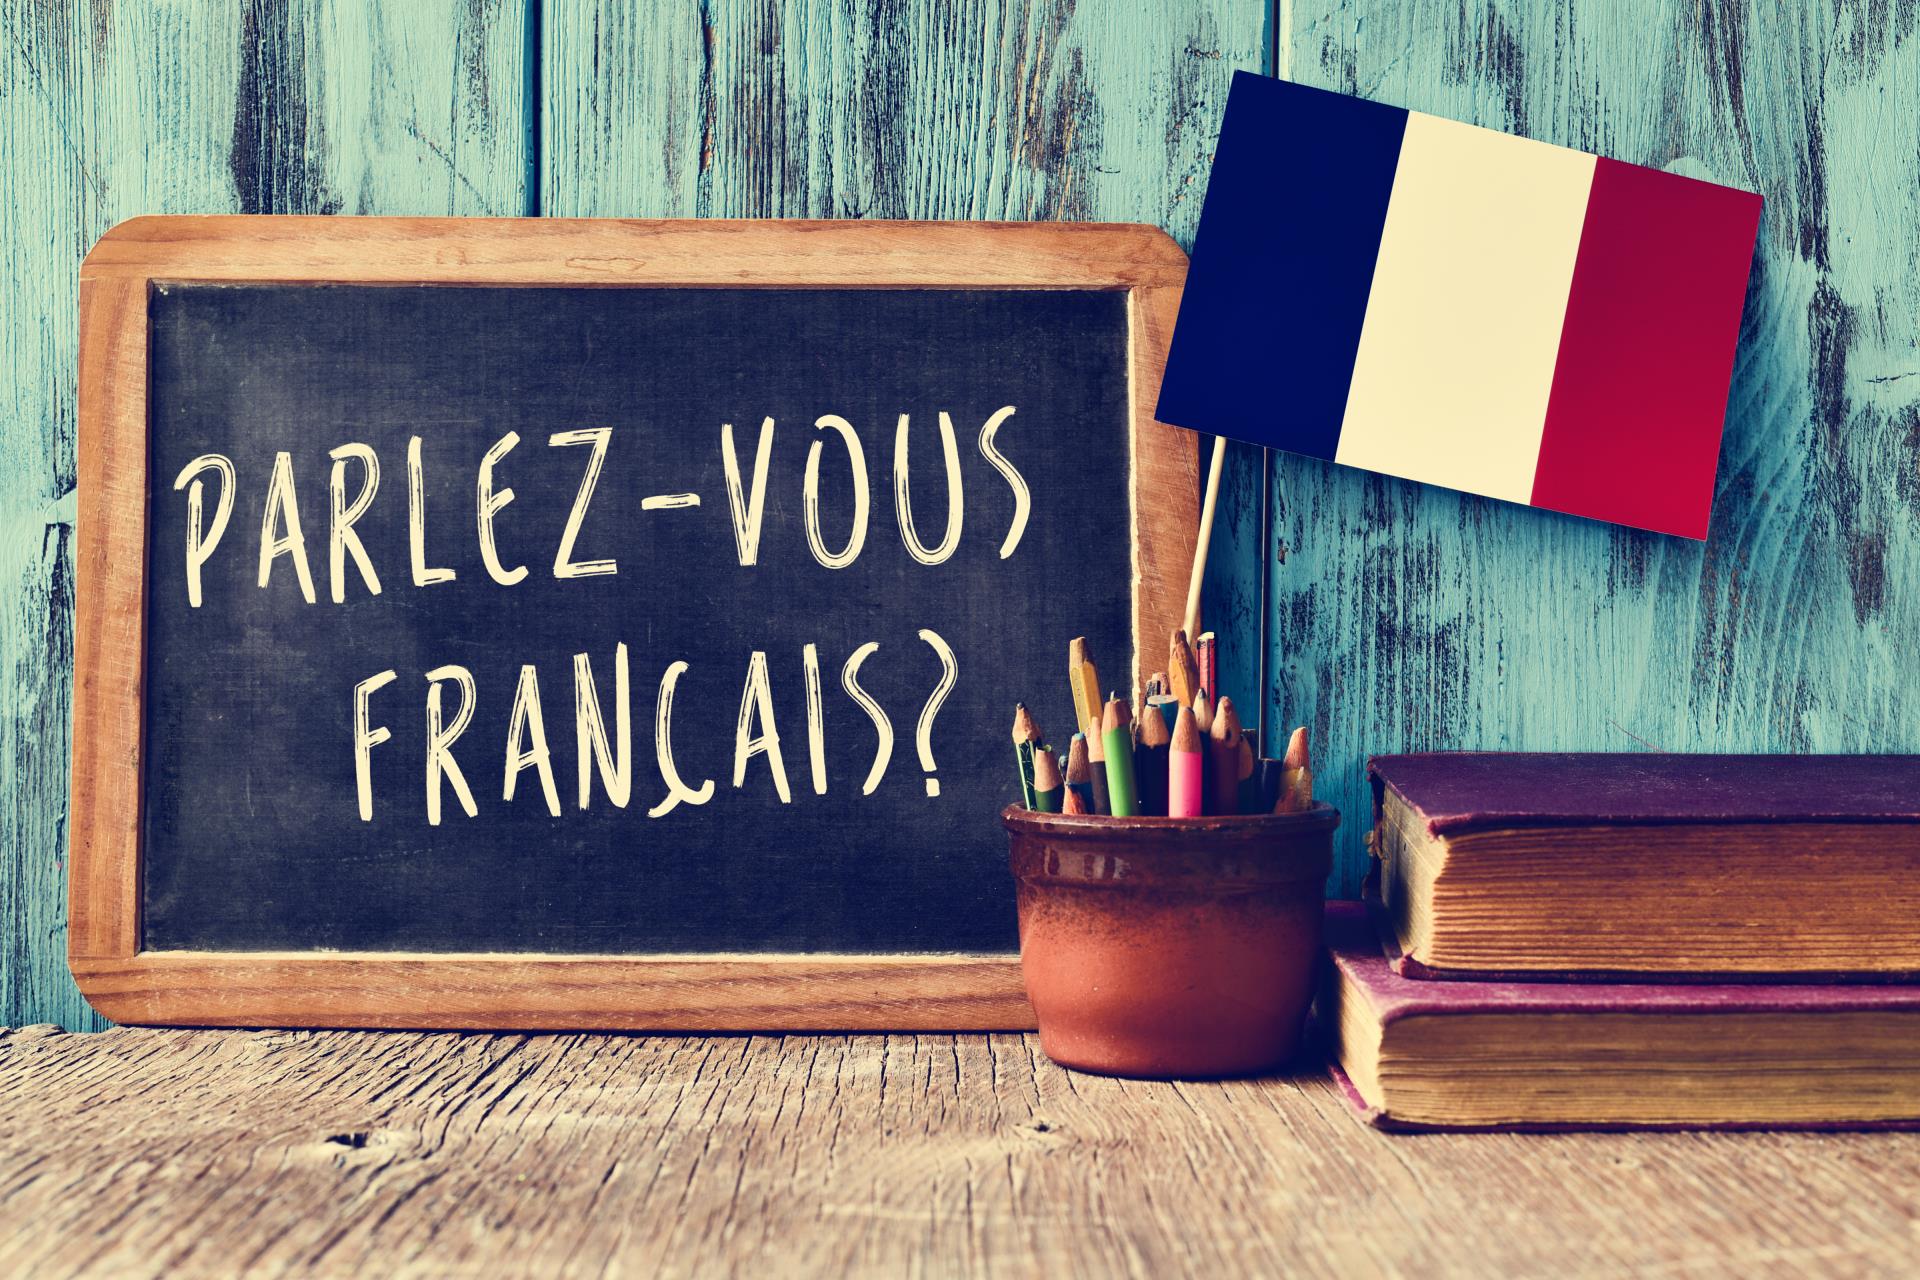 French conversation group